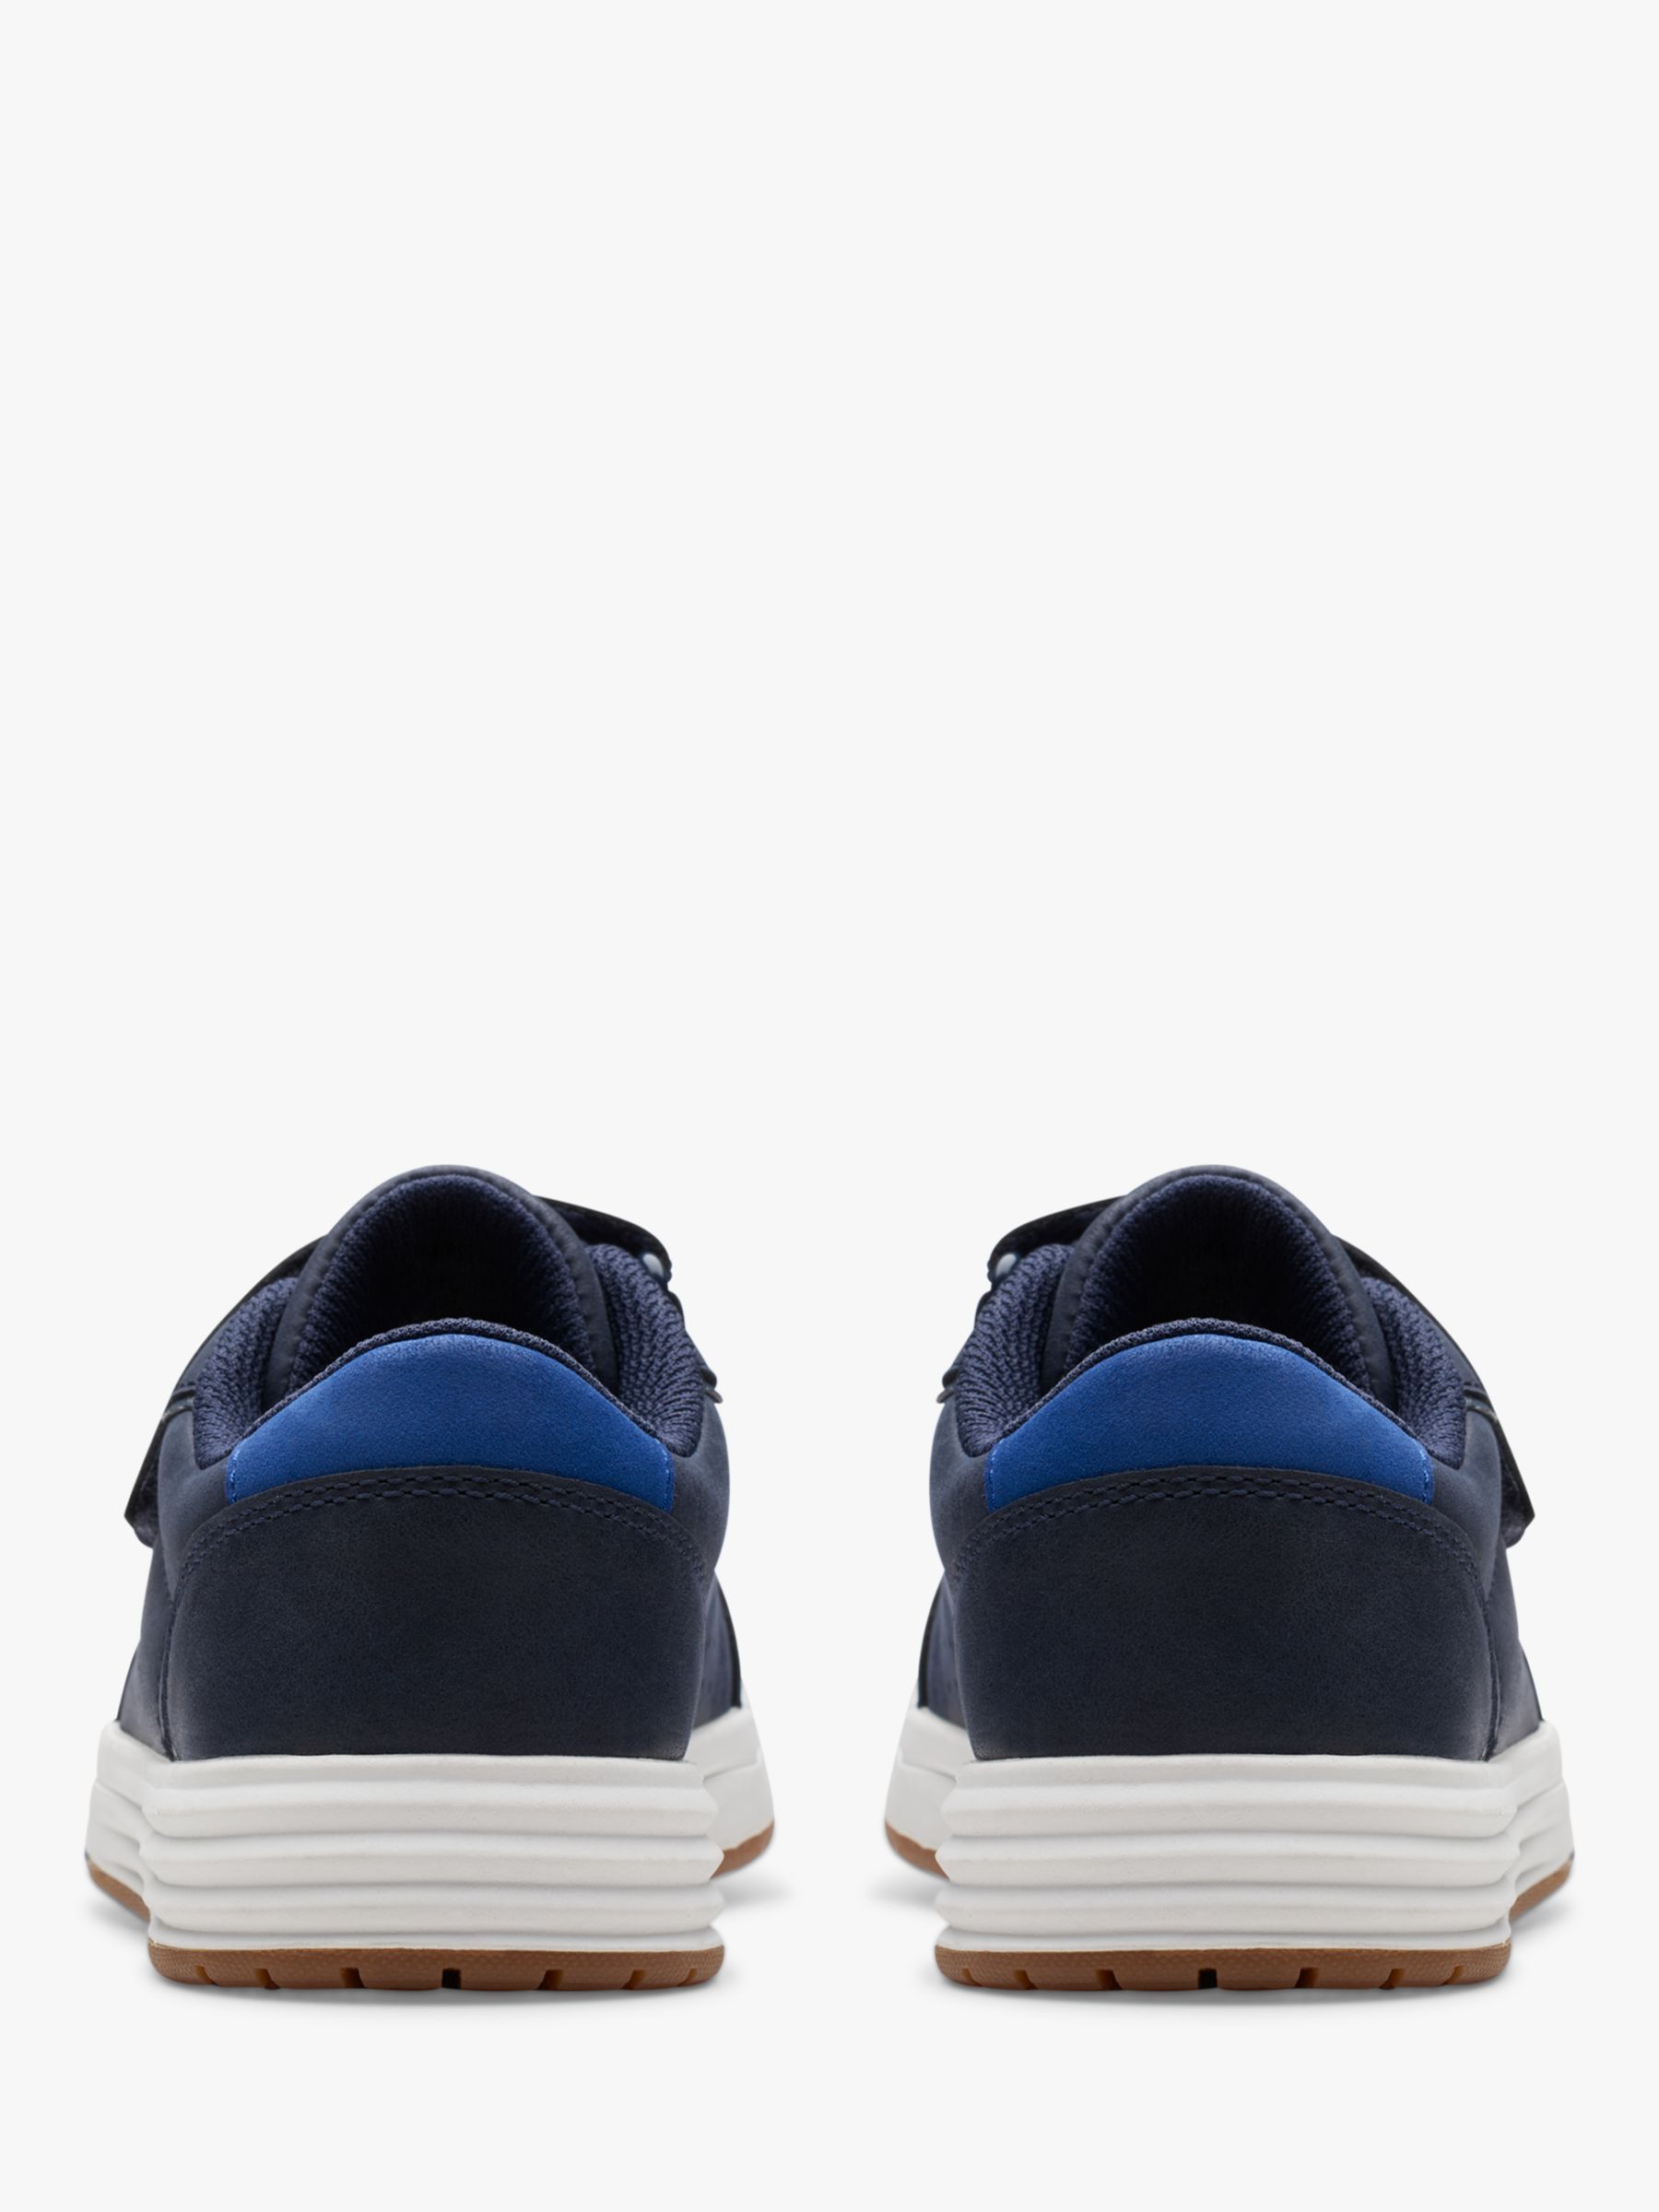 Clarks Kids' Urban Solo Leather Riptape Trainers, Navy, 4F Jnr